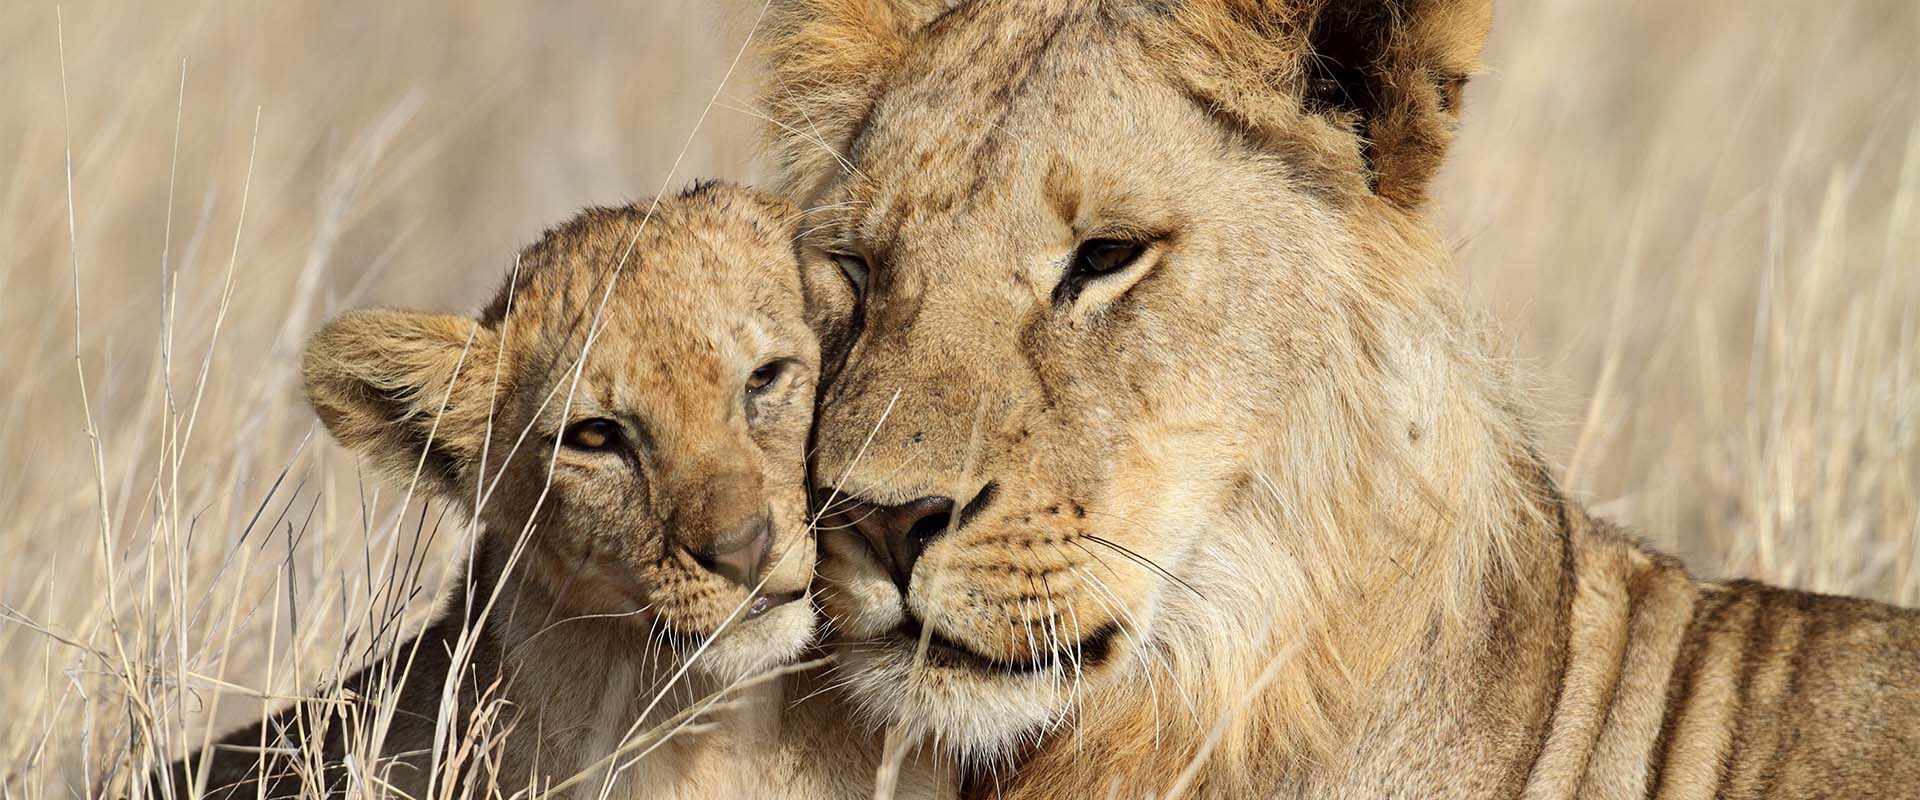 Mother lion and lion cub on the Tanzania Serengeti